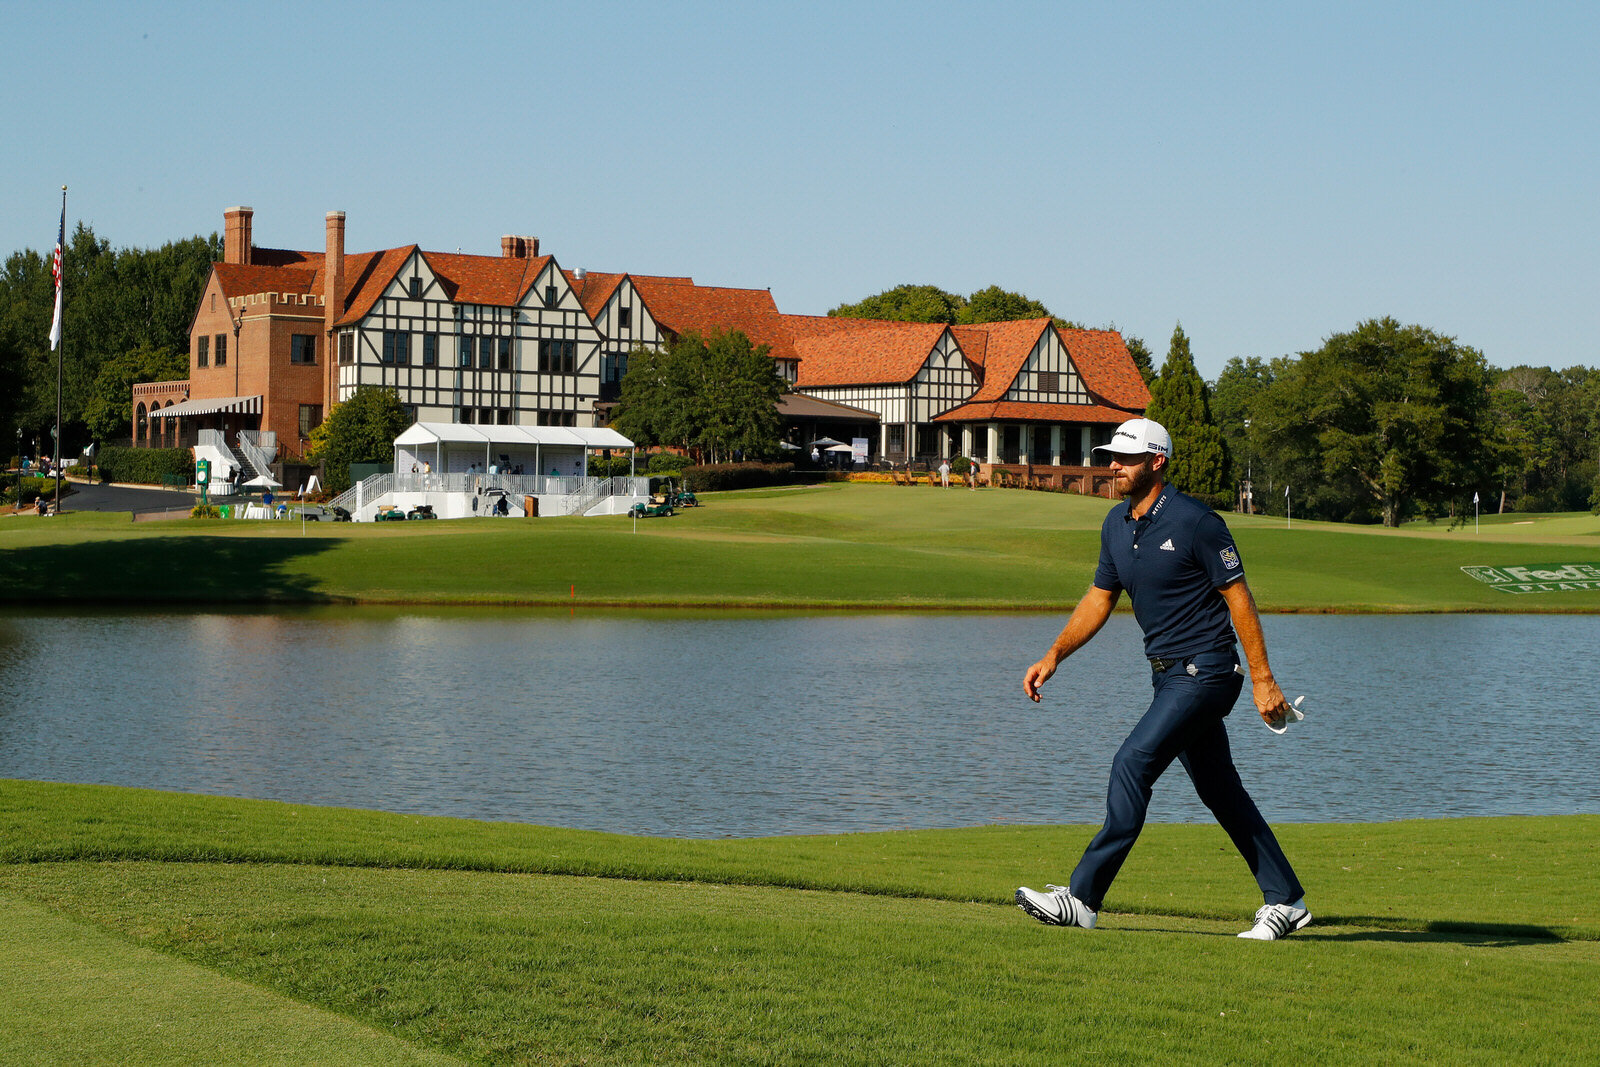  ATLANTA, GEORGIA - SEPTEMBER 07: Dustin Johnson of the United States walks on the 16th hole during the final round of the TOUR Championship at East Lake Golf Club on September 07, 2020 in Atlanta, Georgia. (Photo by Kevin C. Cox/Getty Images) 